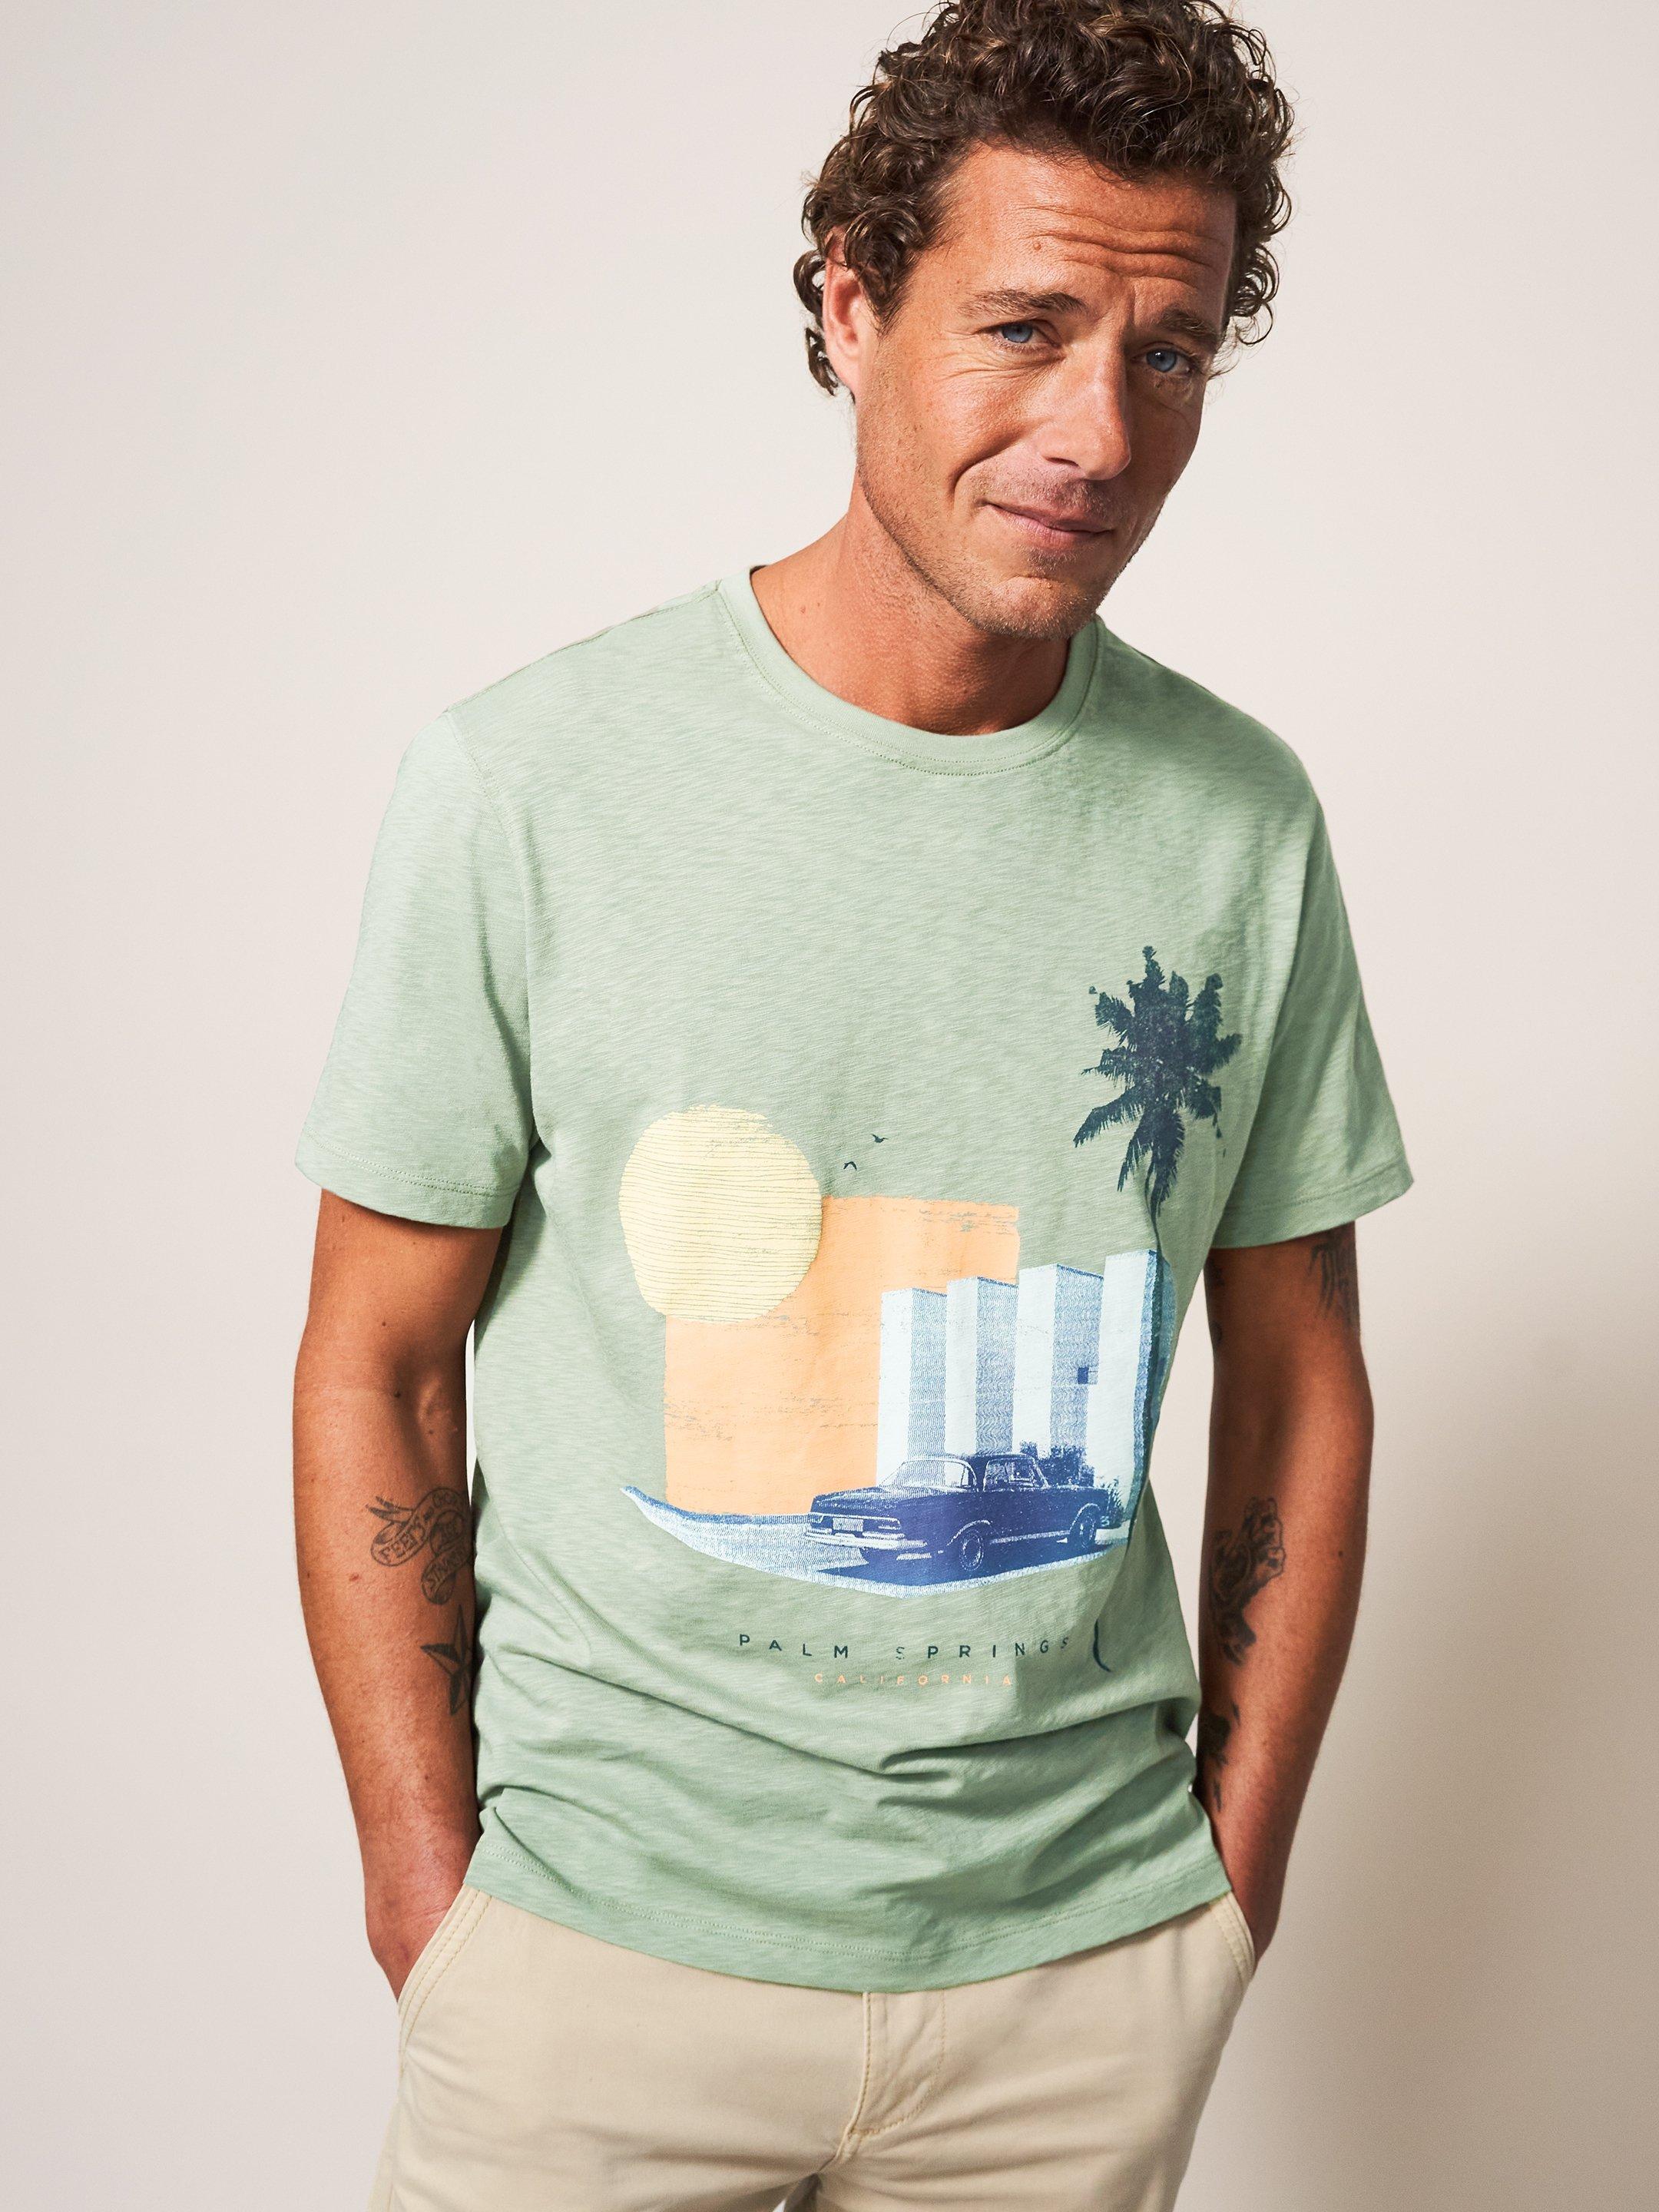 Slagter vrede Officer Palm Springs Graphic Tee in DUSTY GREEN | White Stuff